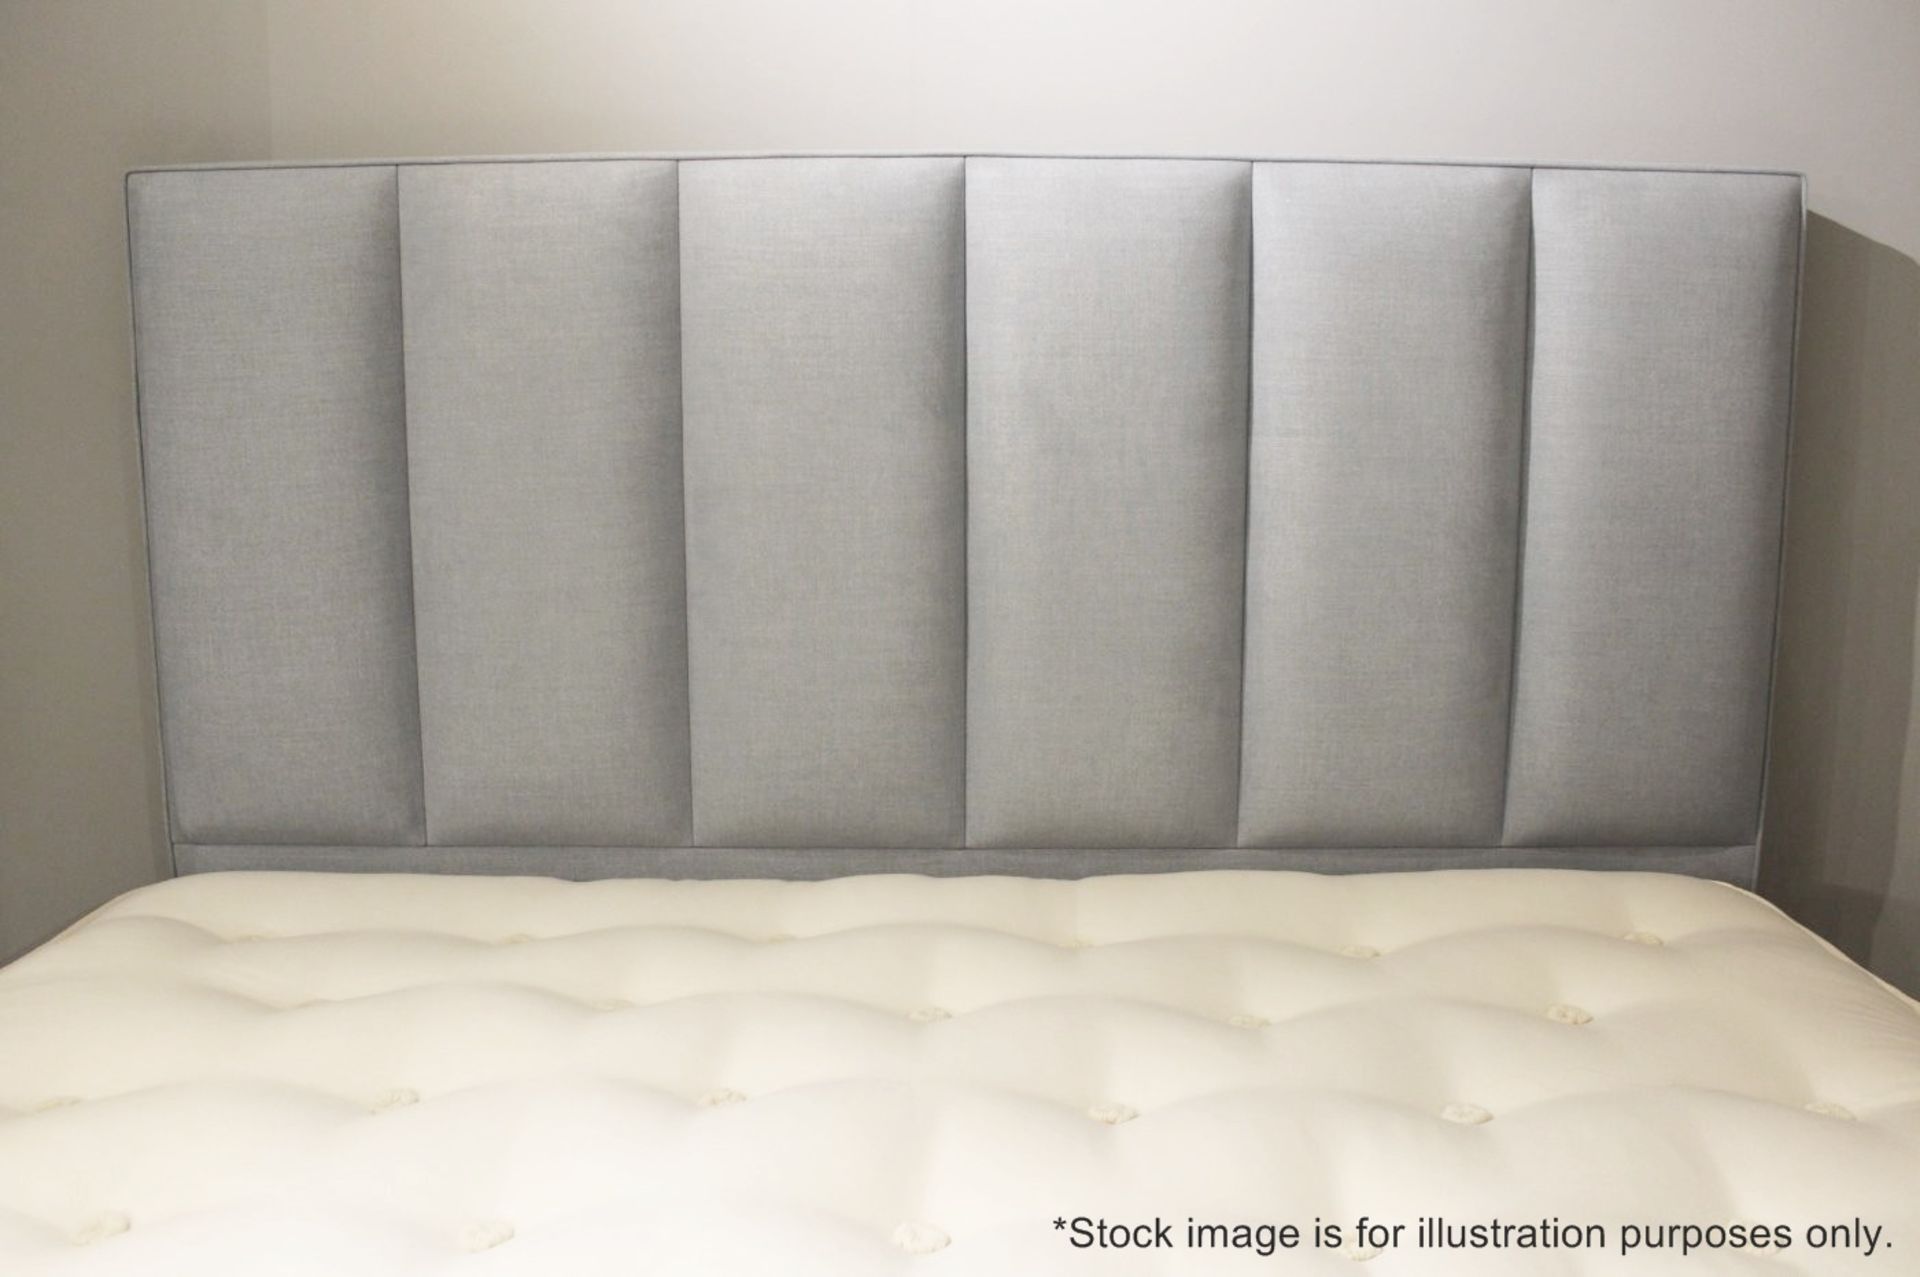 1 x VISPRING 'Ceto' Superking Headboard Richly Upholstered In A Light Beige Fabric - RRP £1,720